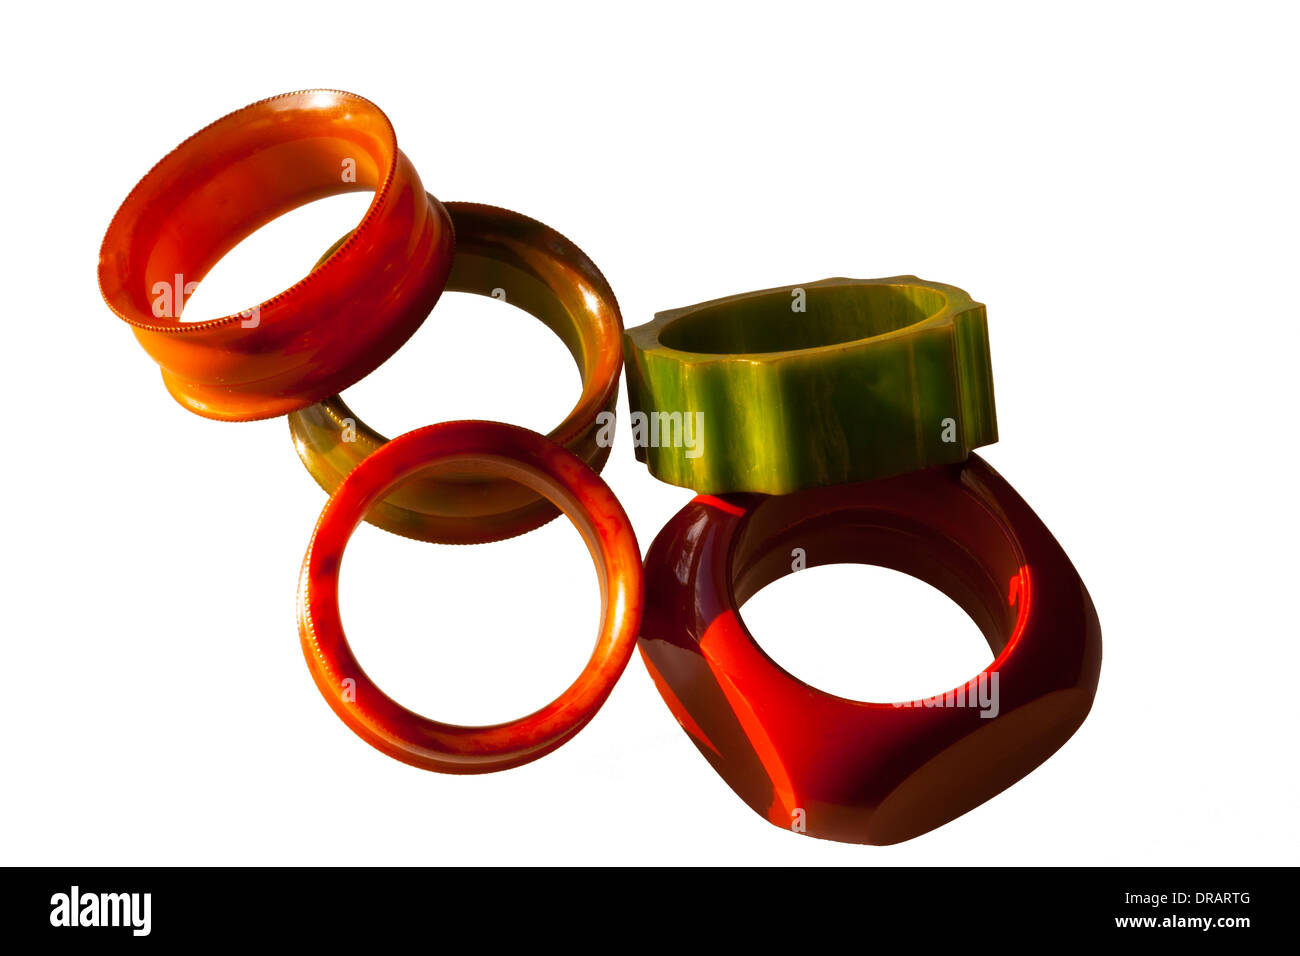 Bakelite napkin rings Cut Out Stock Images & Pictures - Alamy